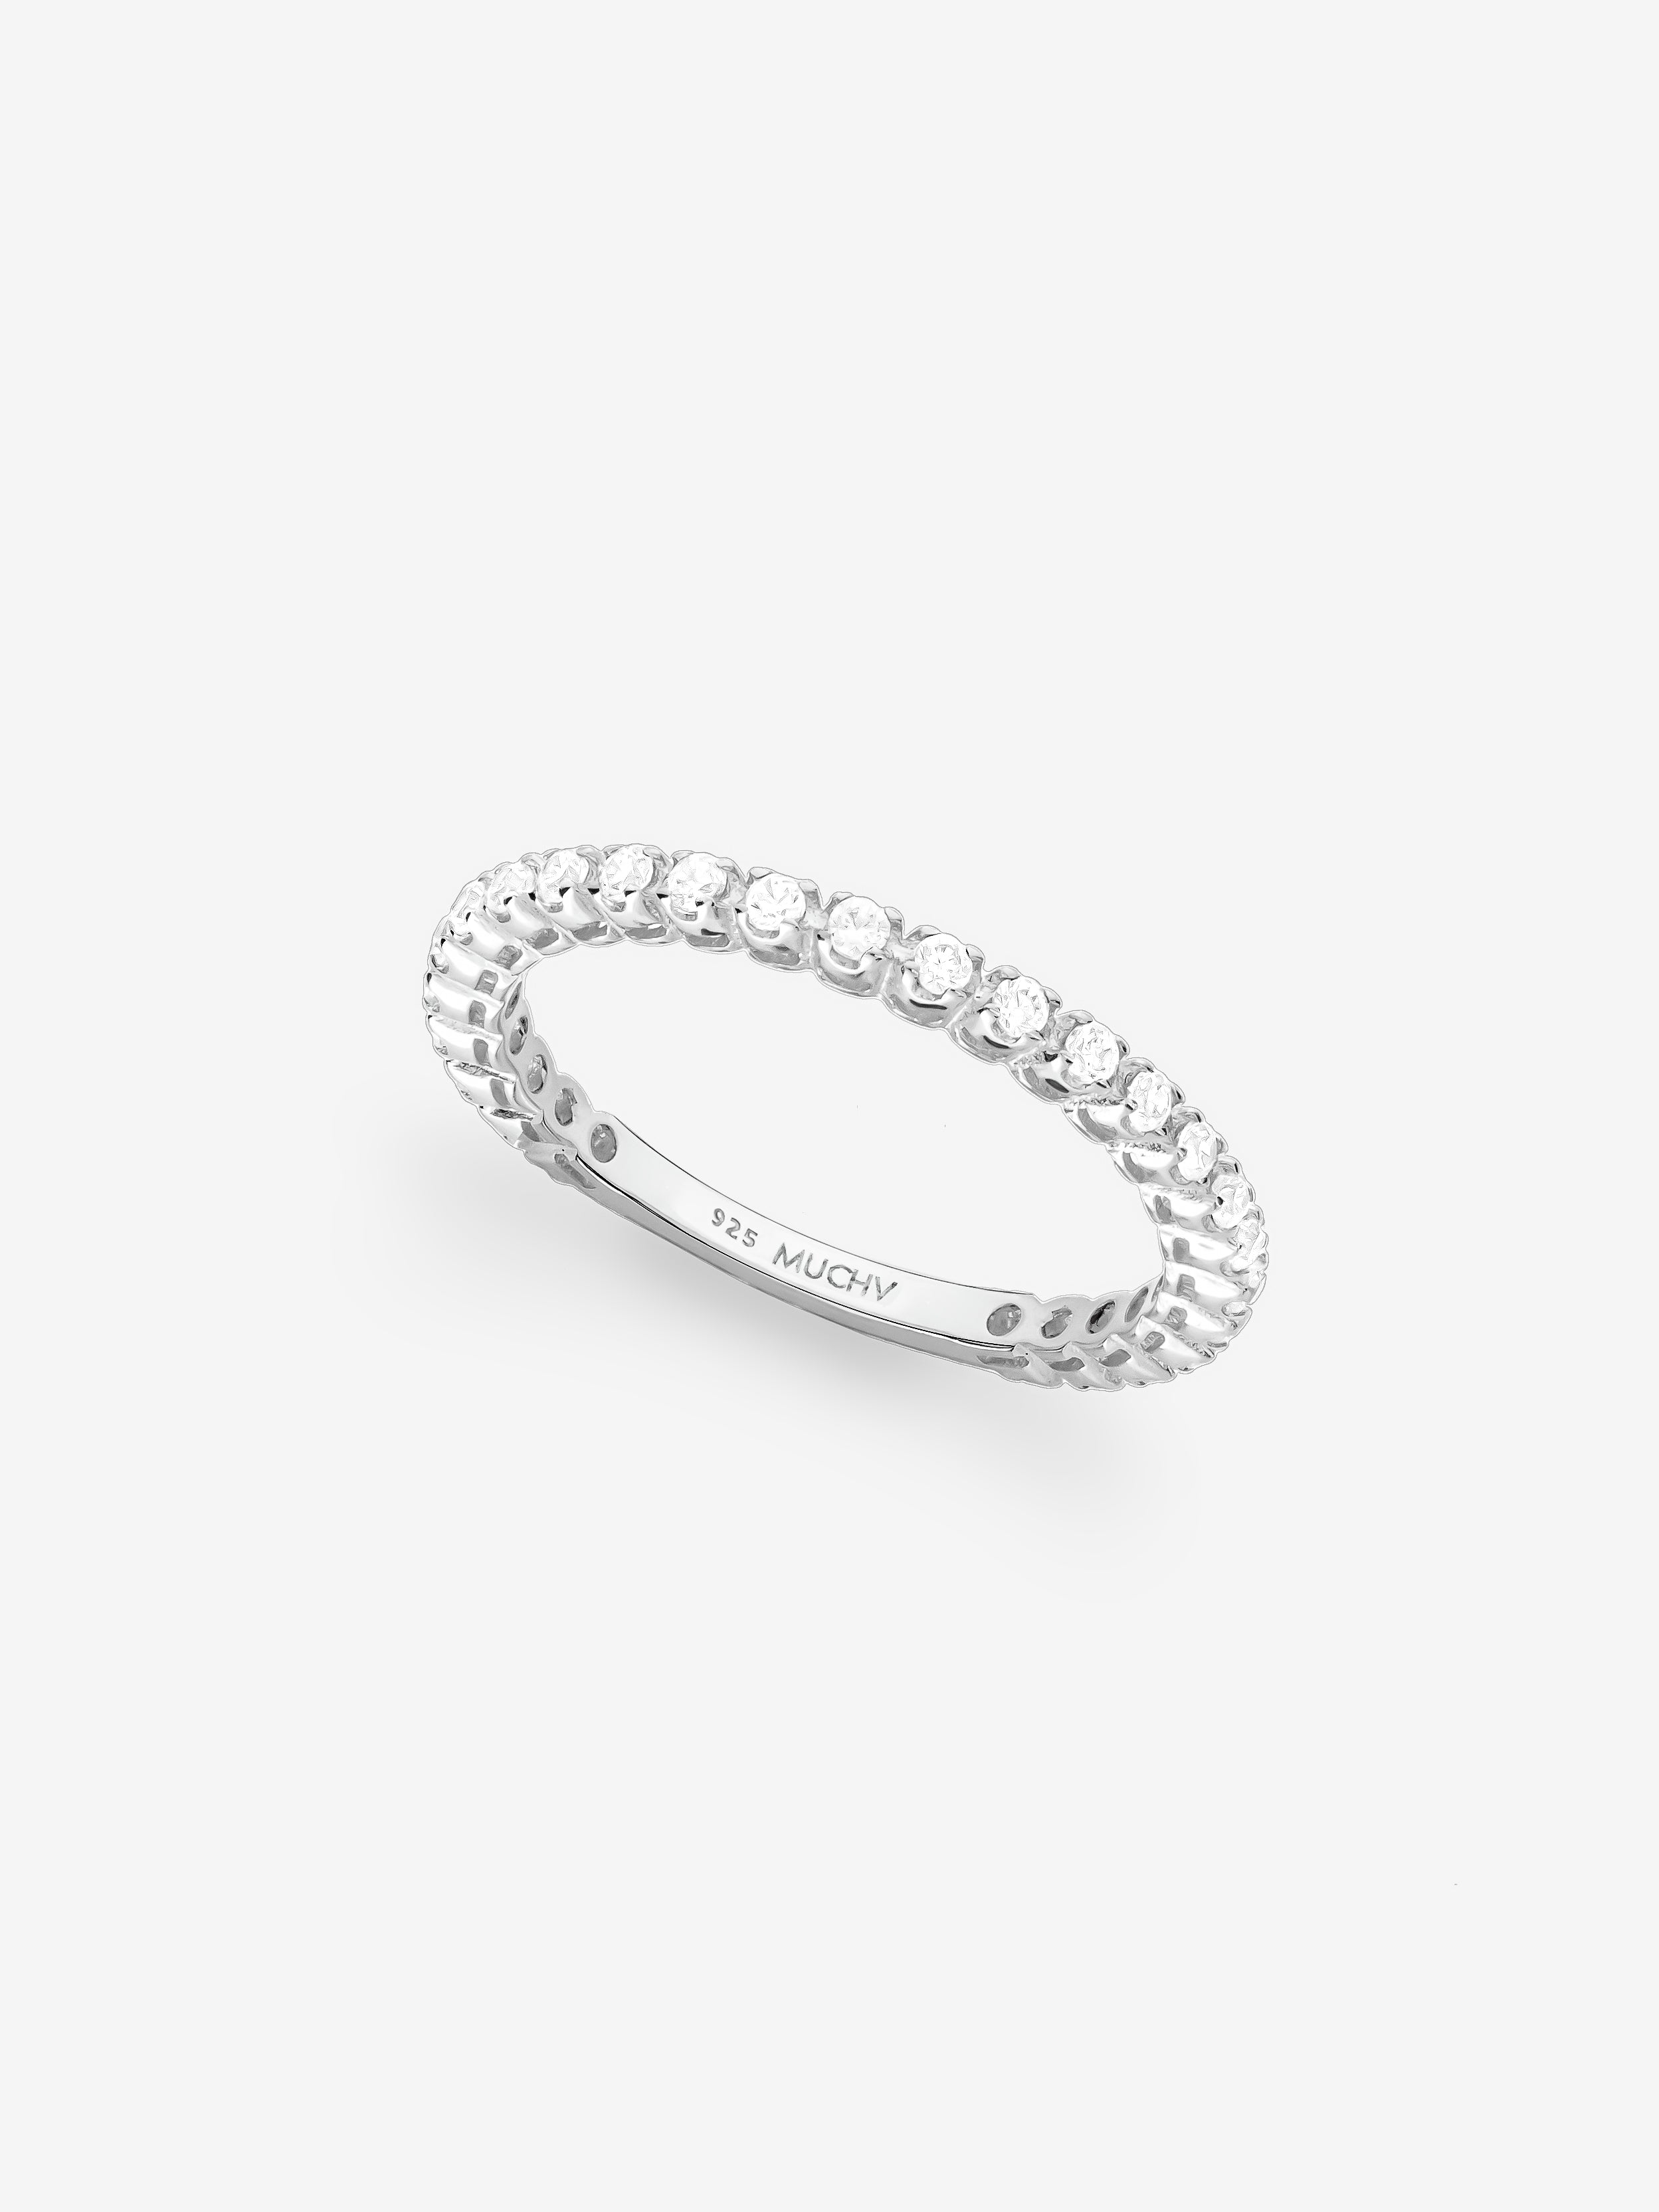 Silver Thin Ring With Tiny Round Stones